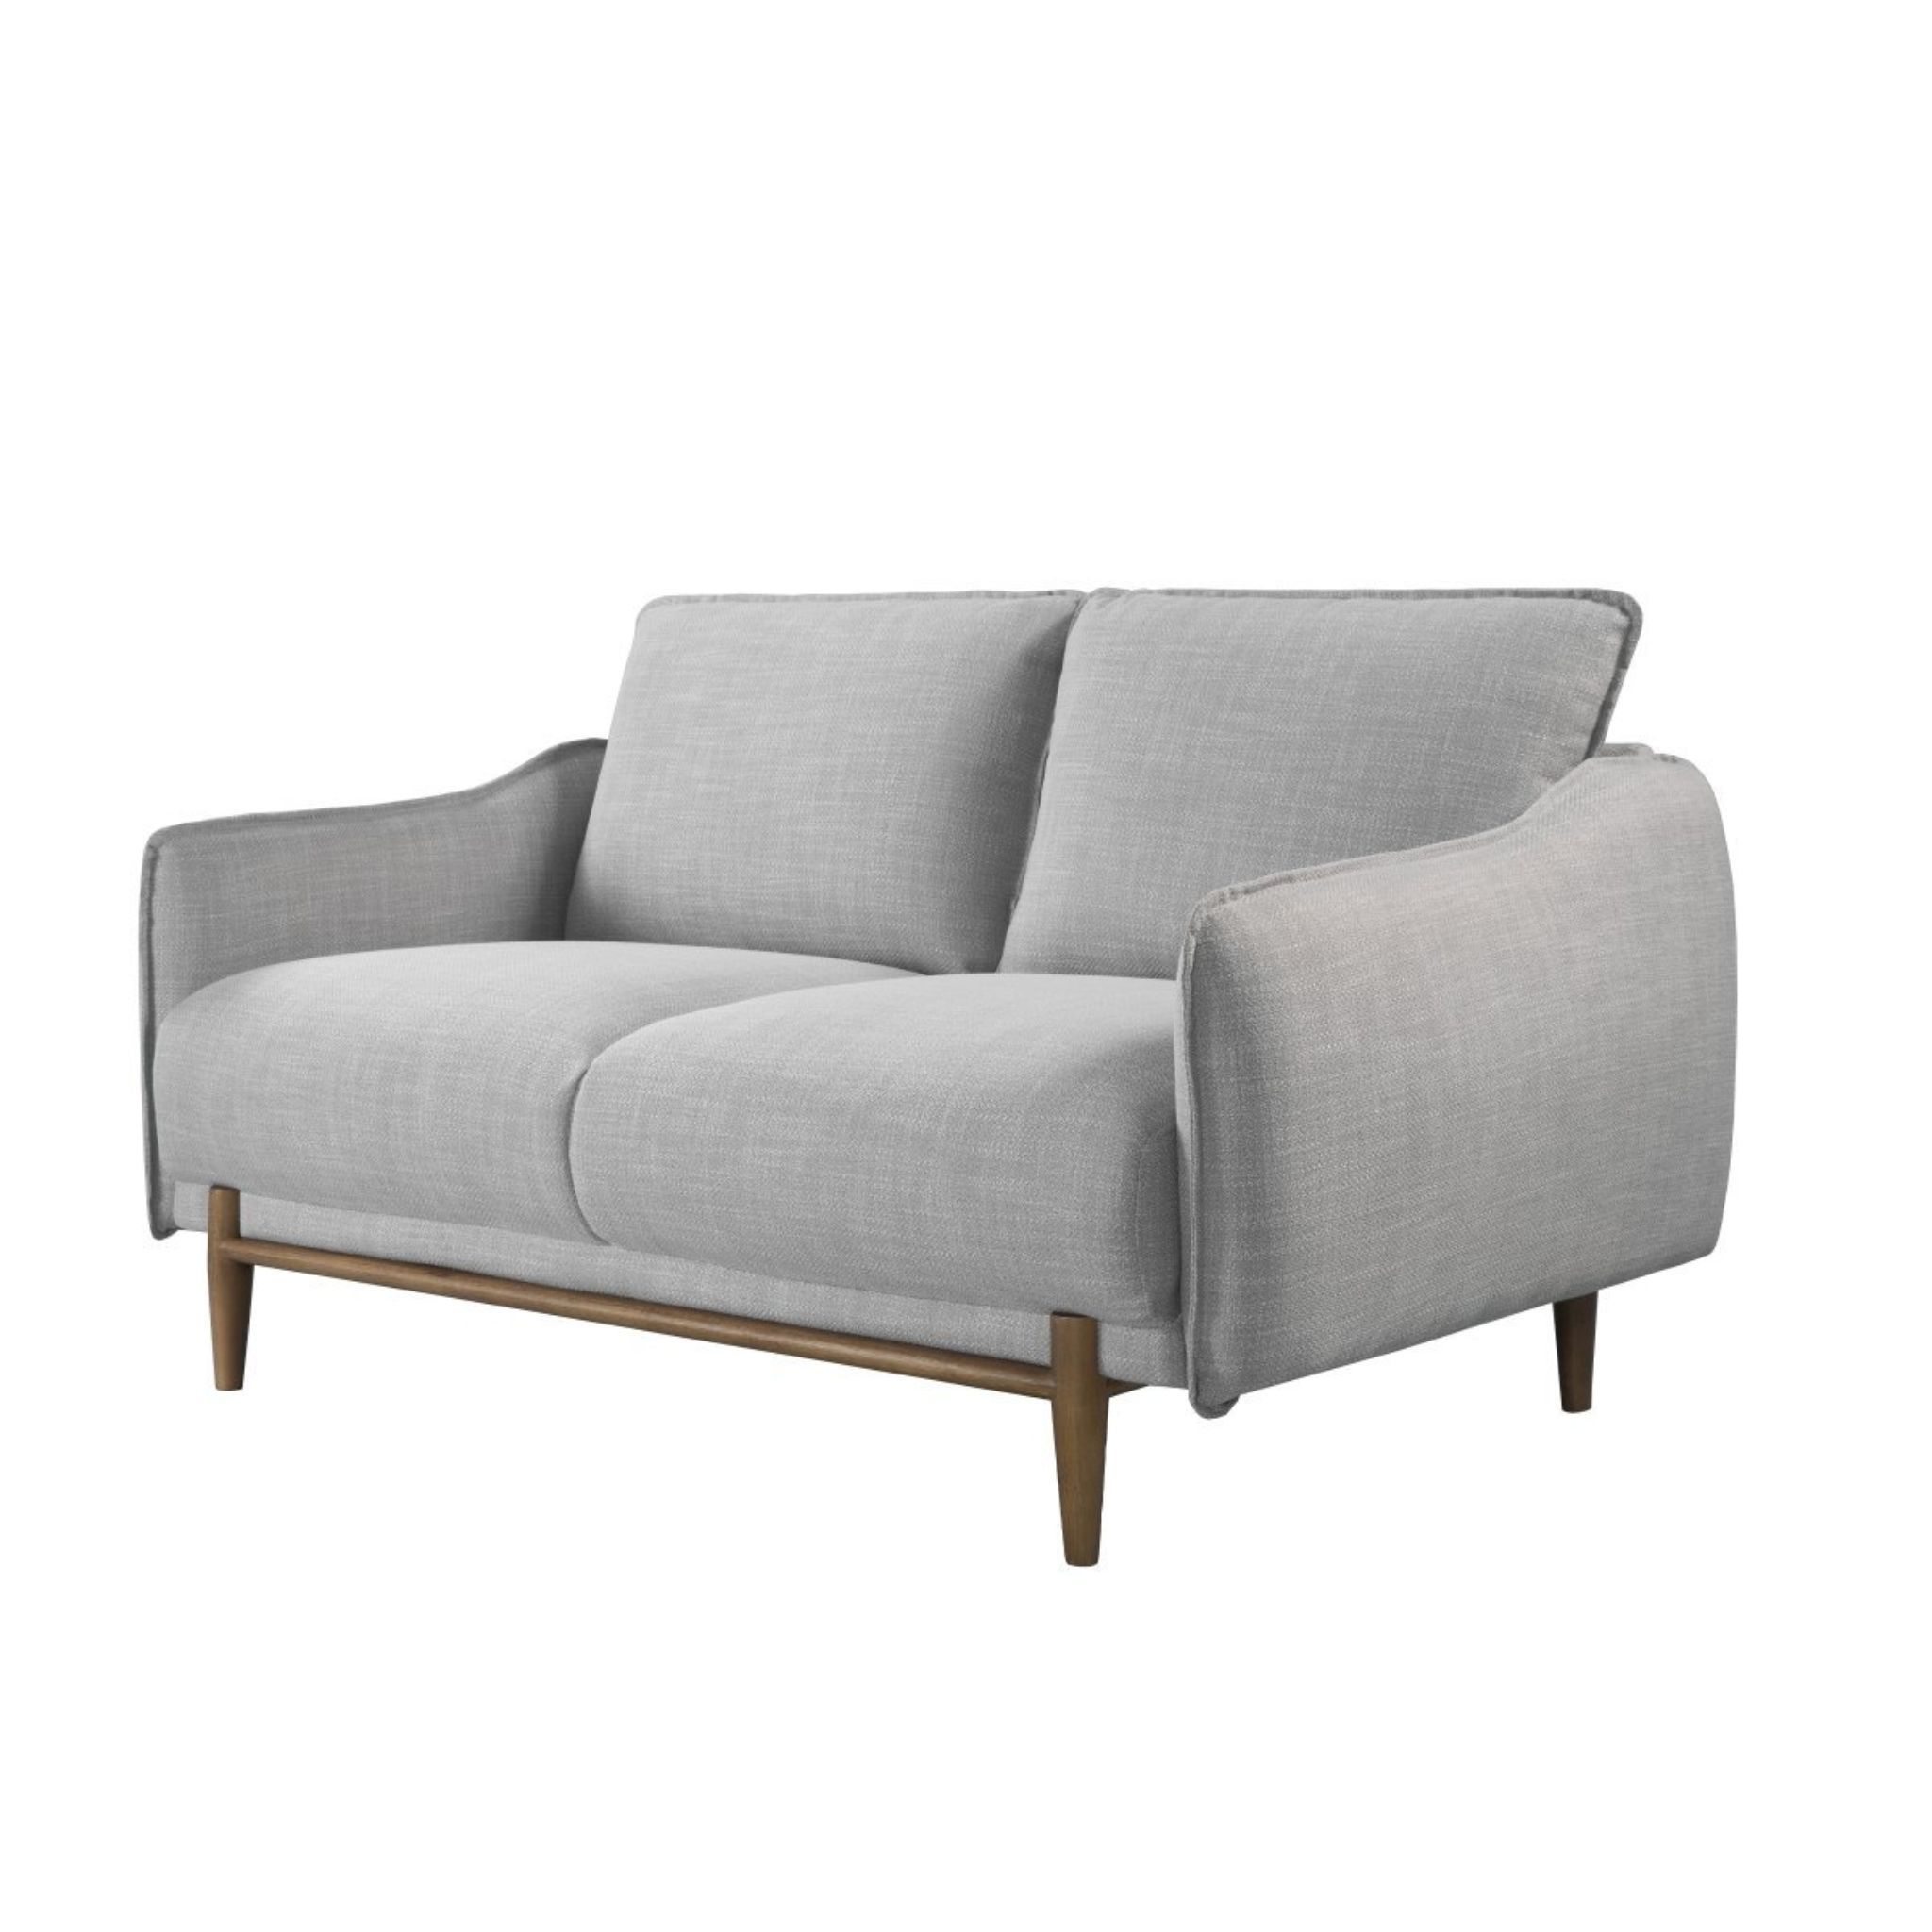 Louie 2 Seater Sofa in Grey By Twenty10 Design – Furniture & Homeware – The Luxe Home